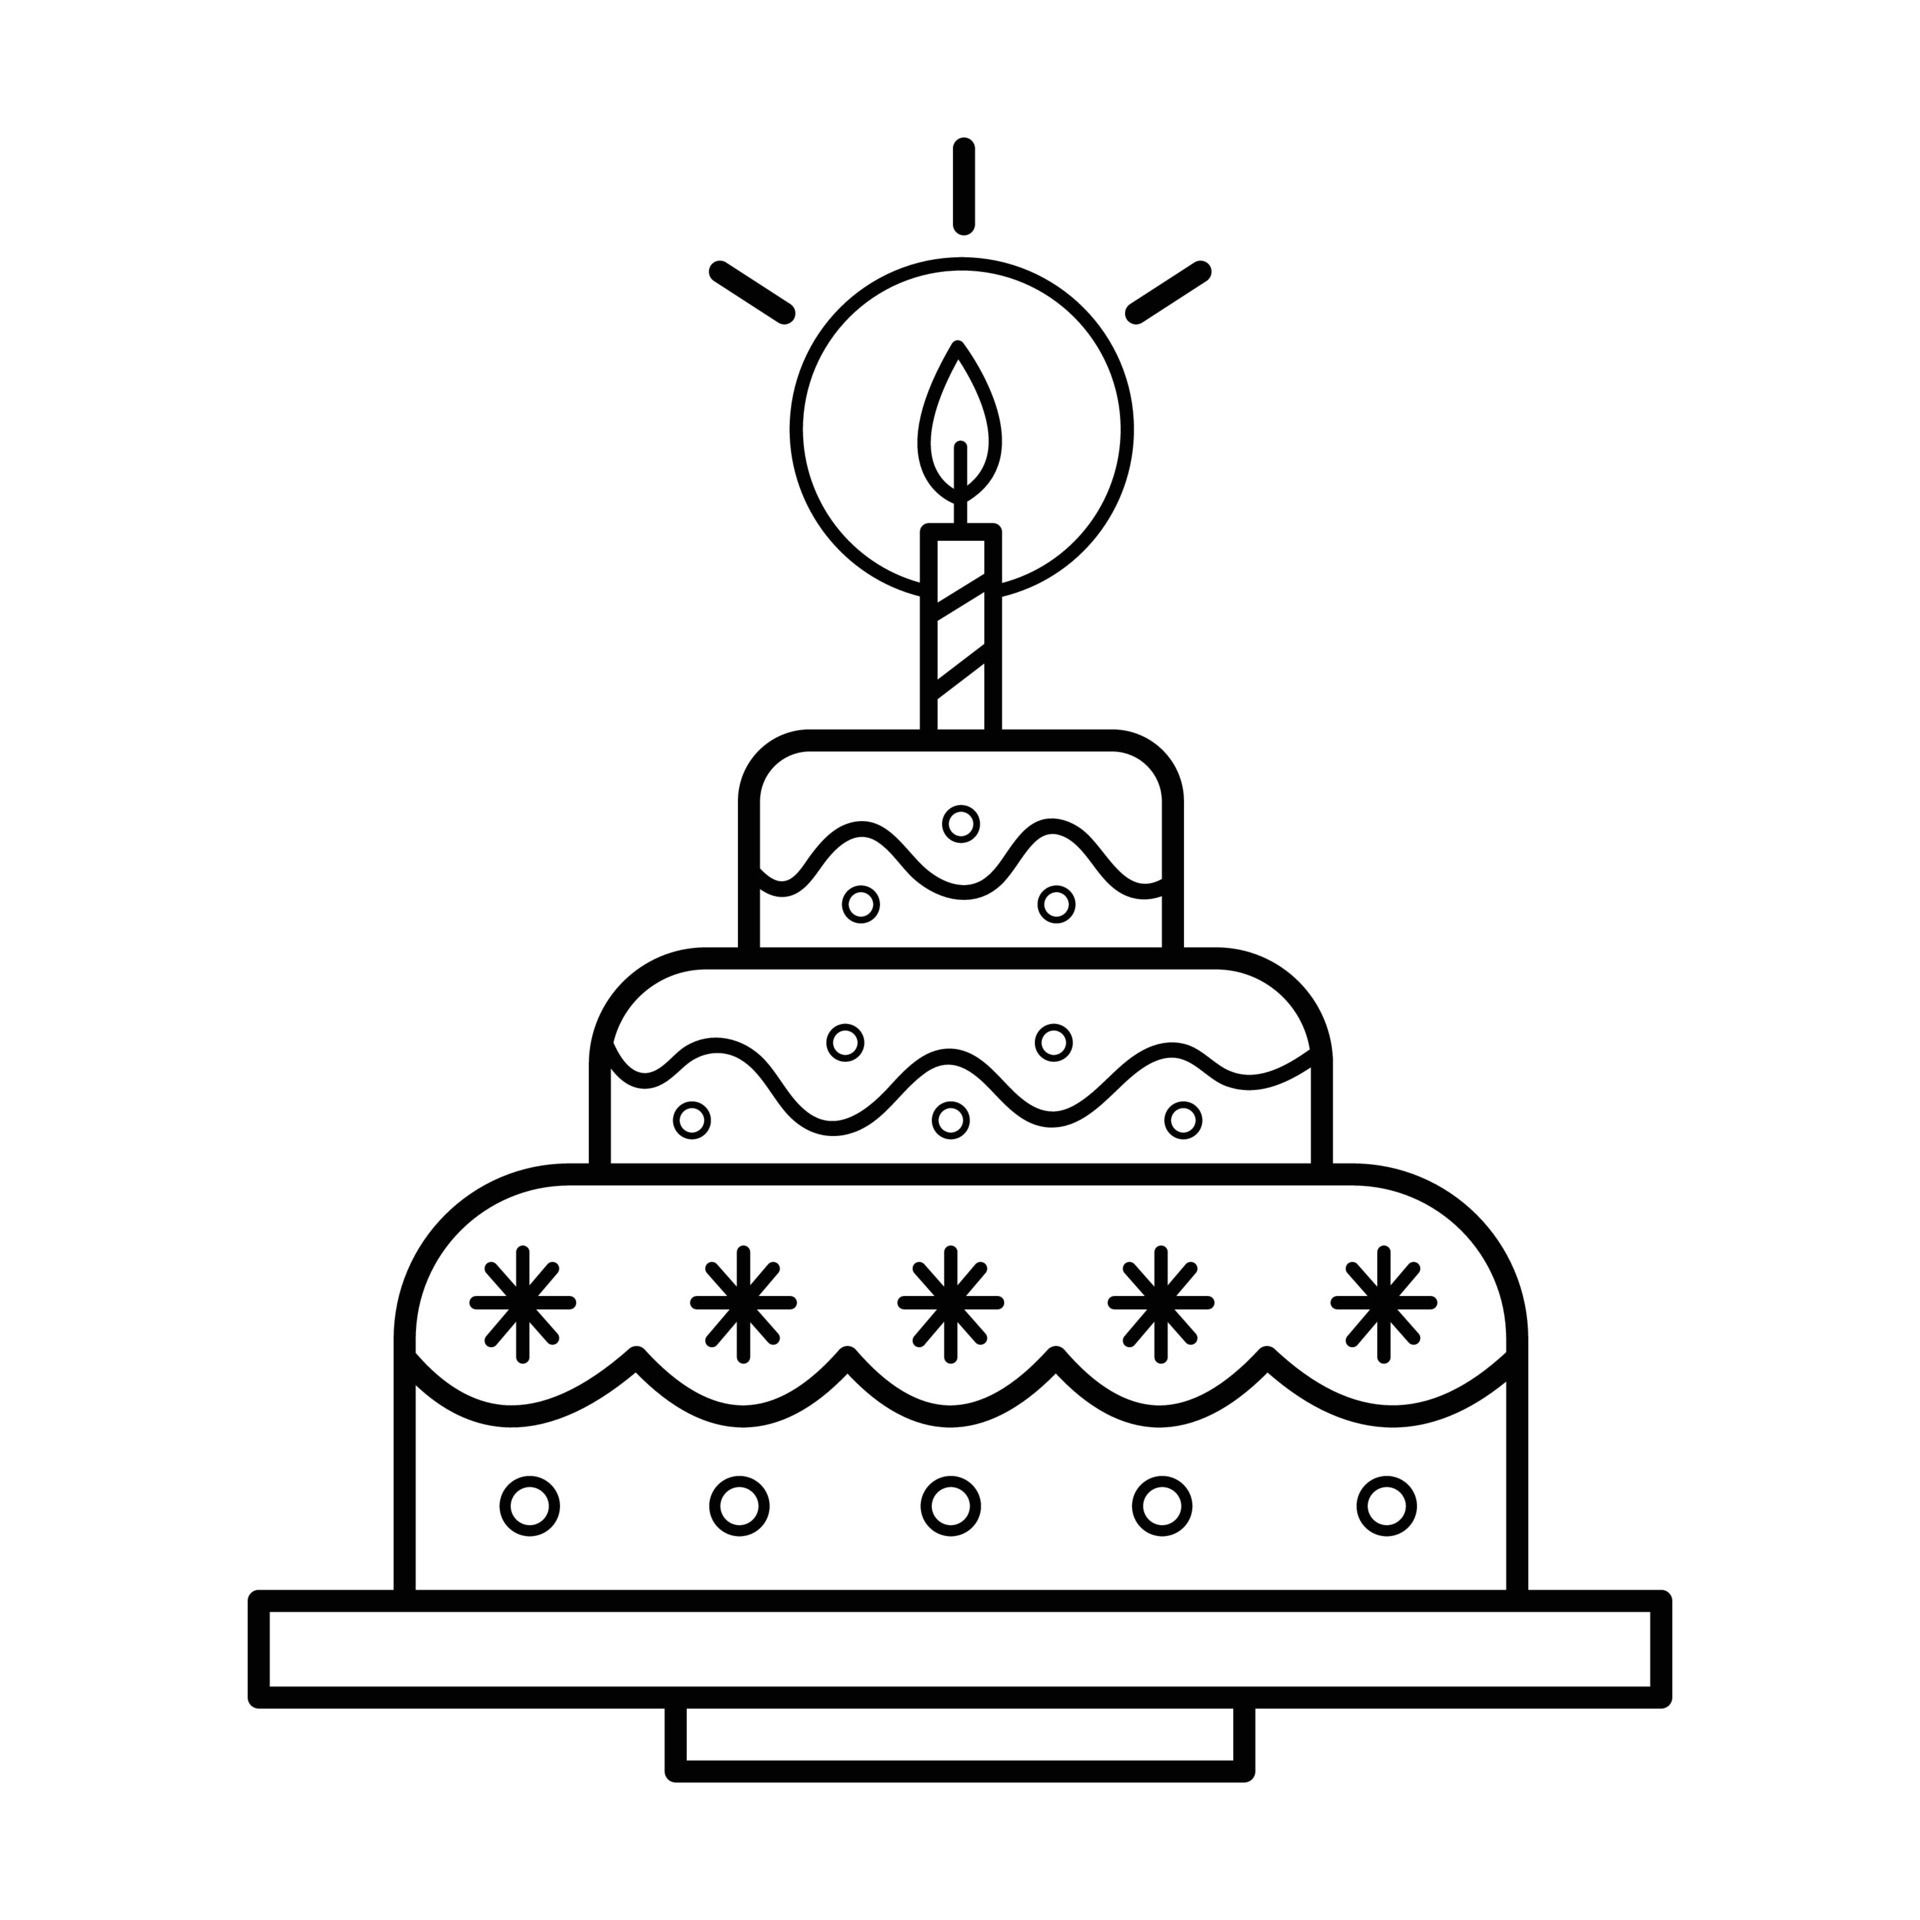 11300 Birthday Cake Drawing Stock Photos Pictures  RoyaltyFree Images   iStock  Birthday cake sketch Pizza Birthday card